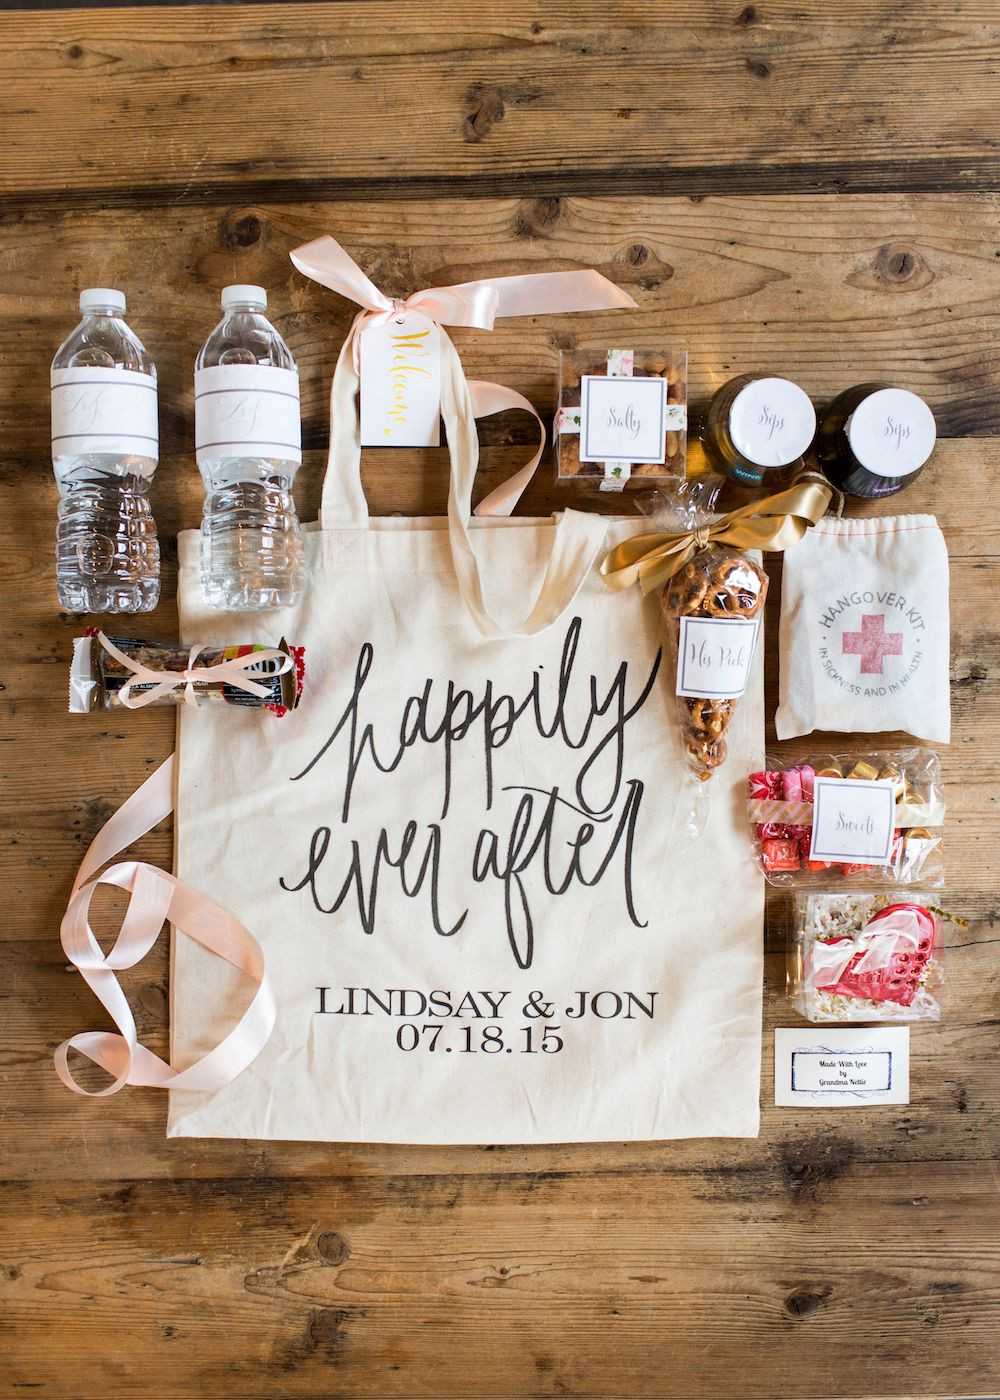 Wedding Gift Bag Ideas
 Wedding Wednesday What We Put in Our Wedding Wel e Bags